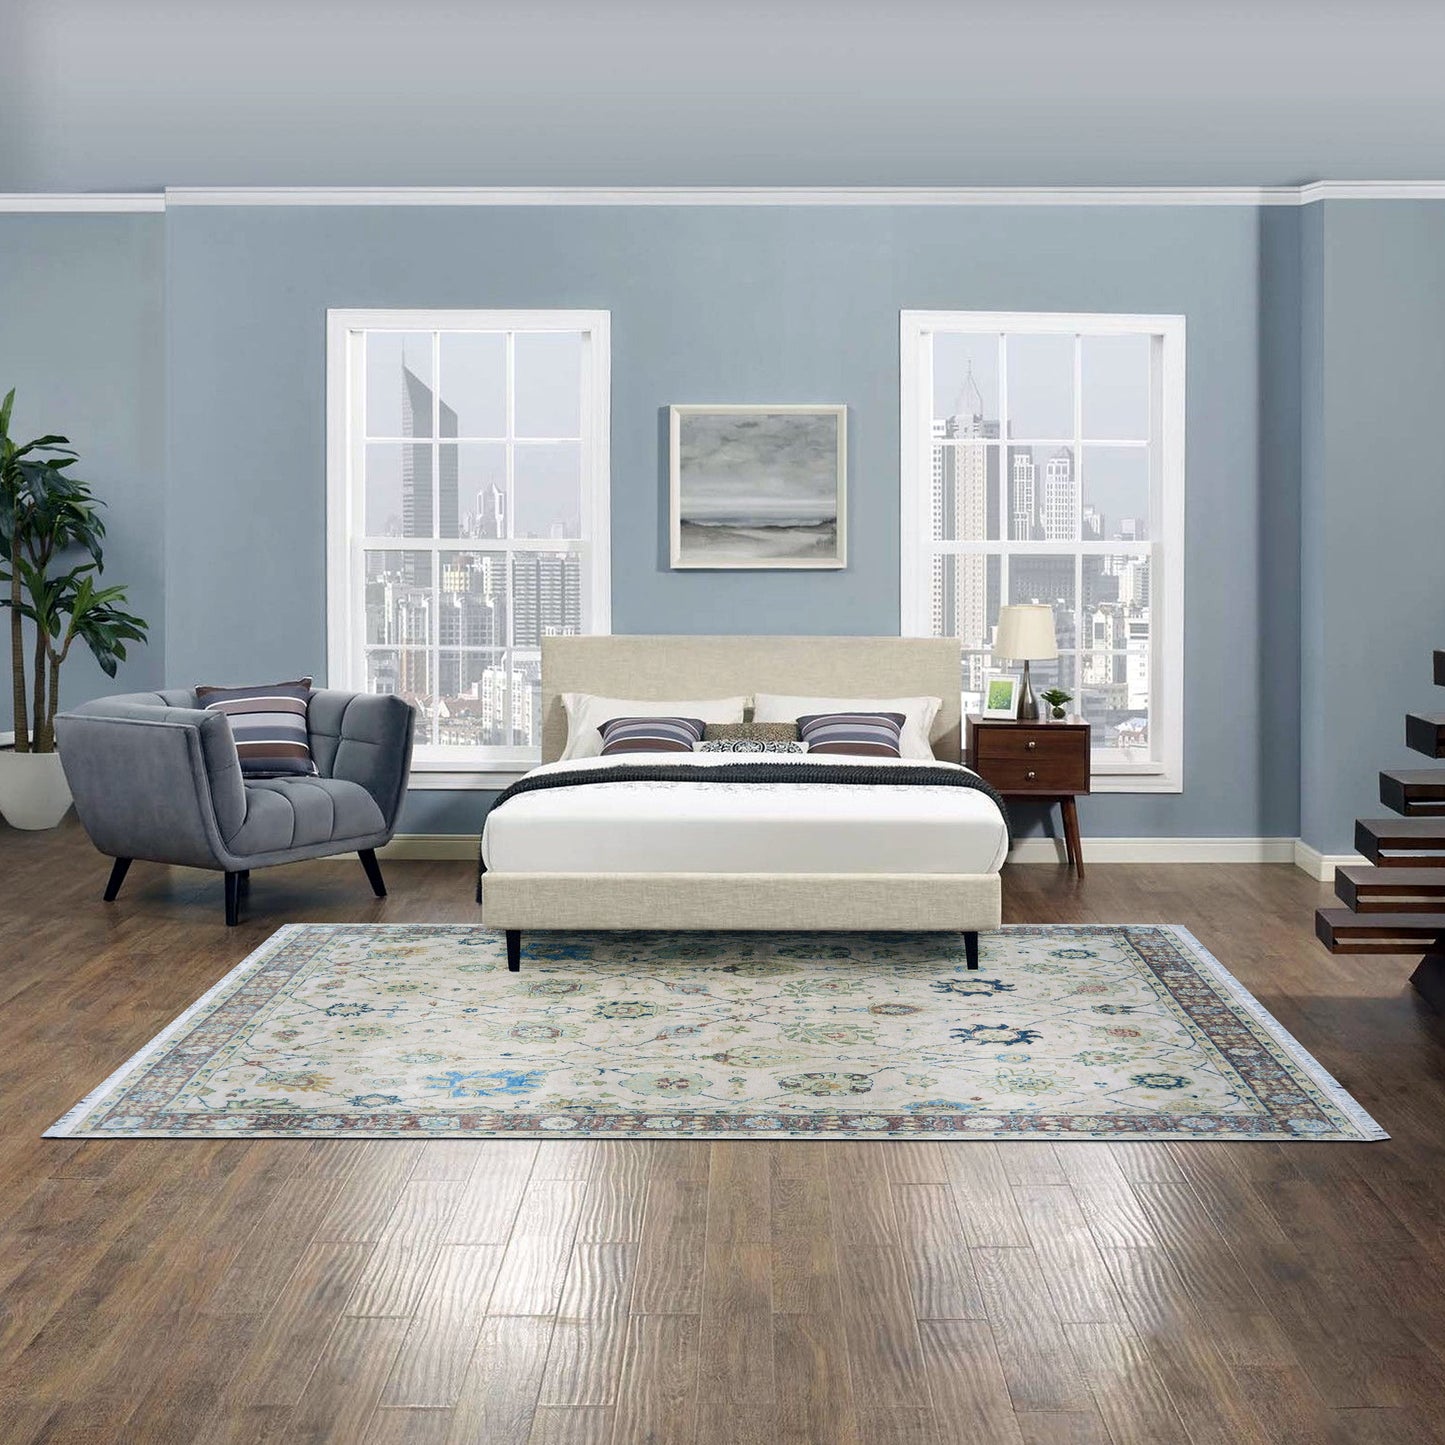 Get trendy with Ivory Multi Pure silk Transitional Handknotted Area Rug 7.9x10ft 236x305Cms - Contemporary Rugs available at Jaipur Oriental Rugs. Grab yours for $9300.00 today!